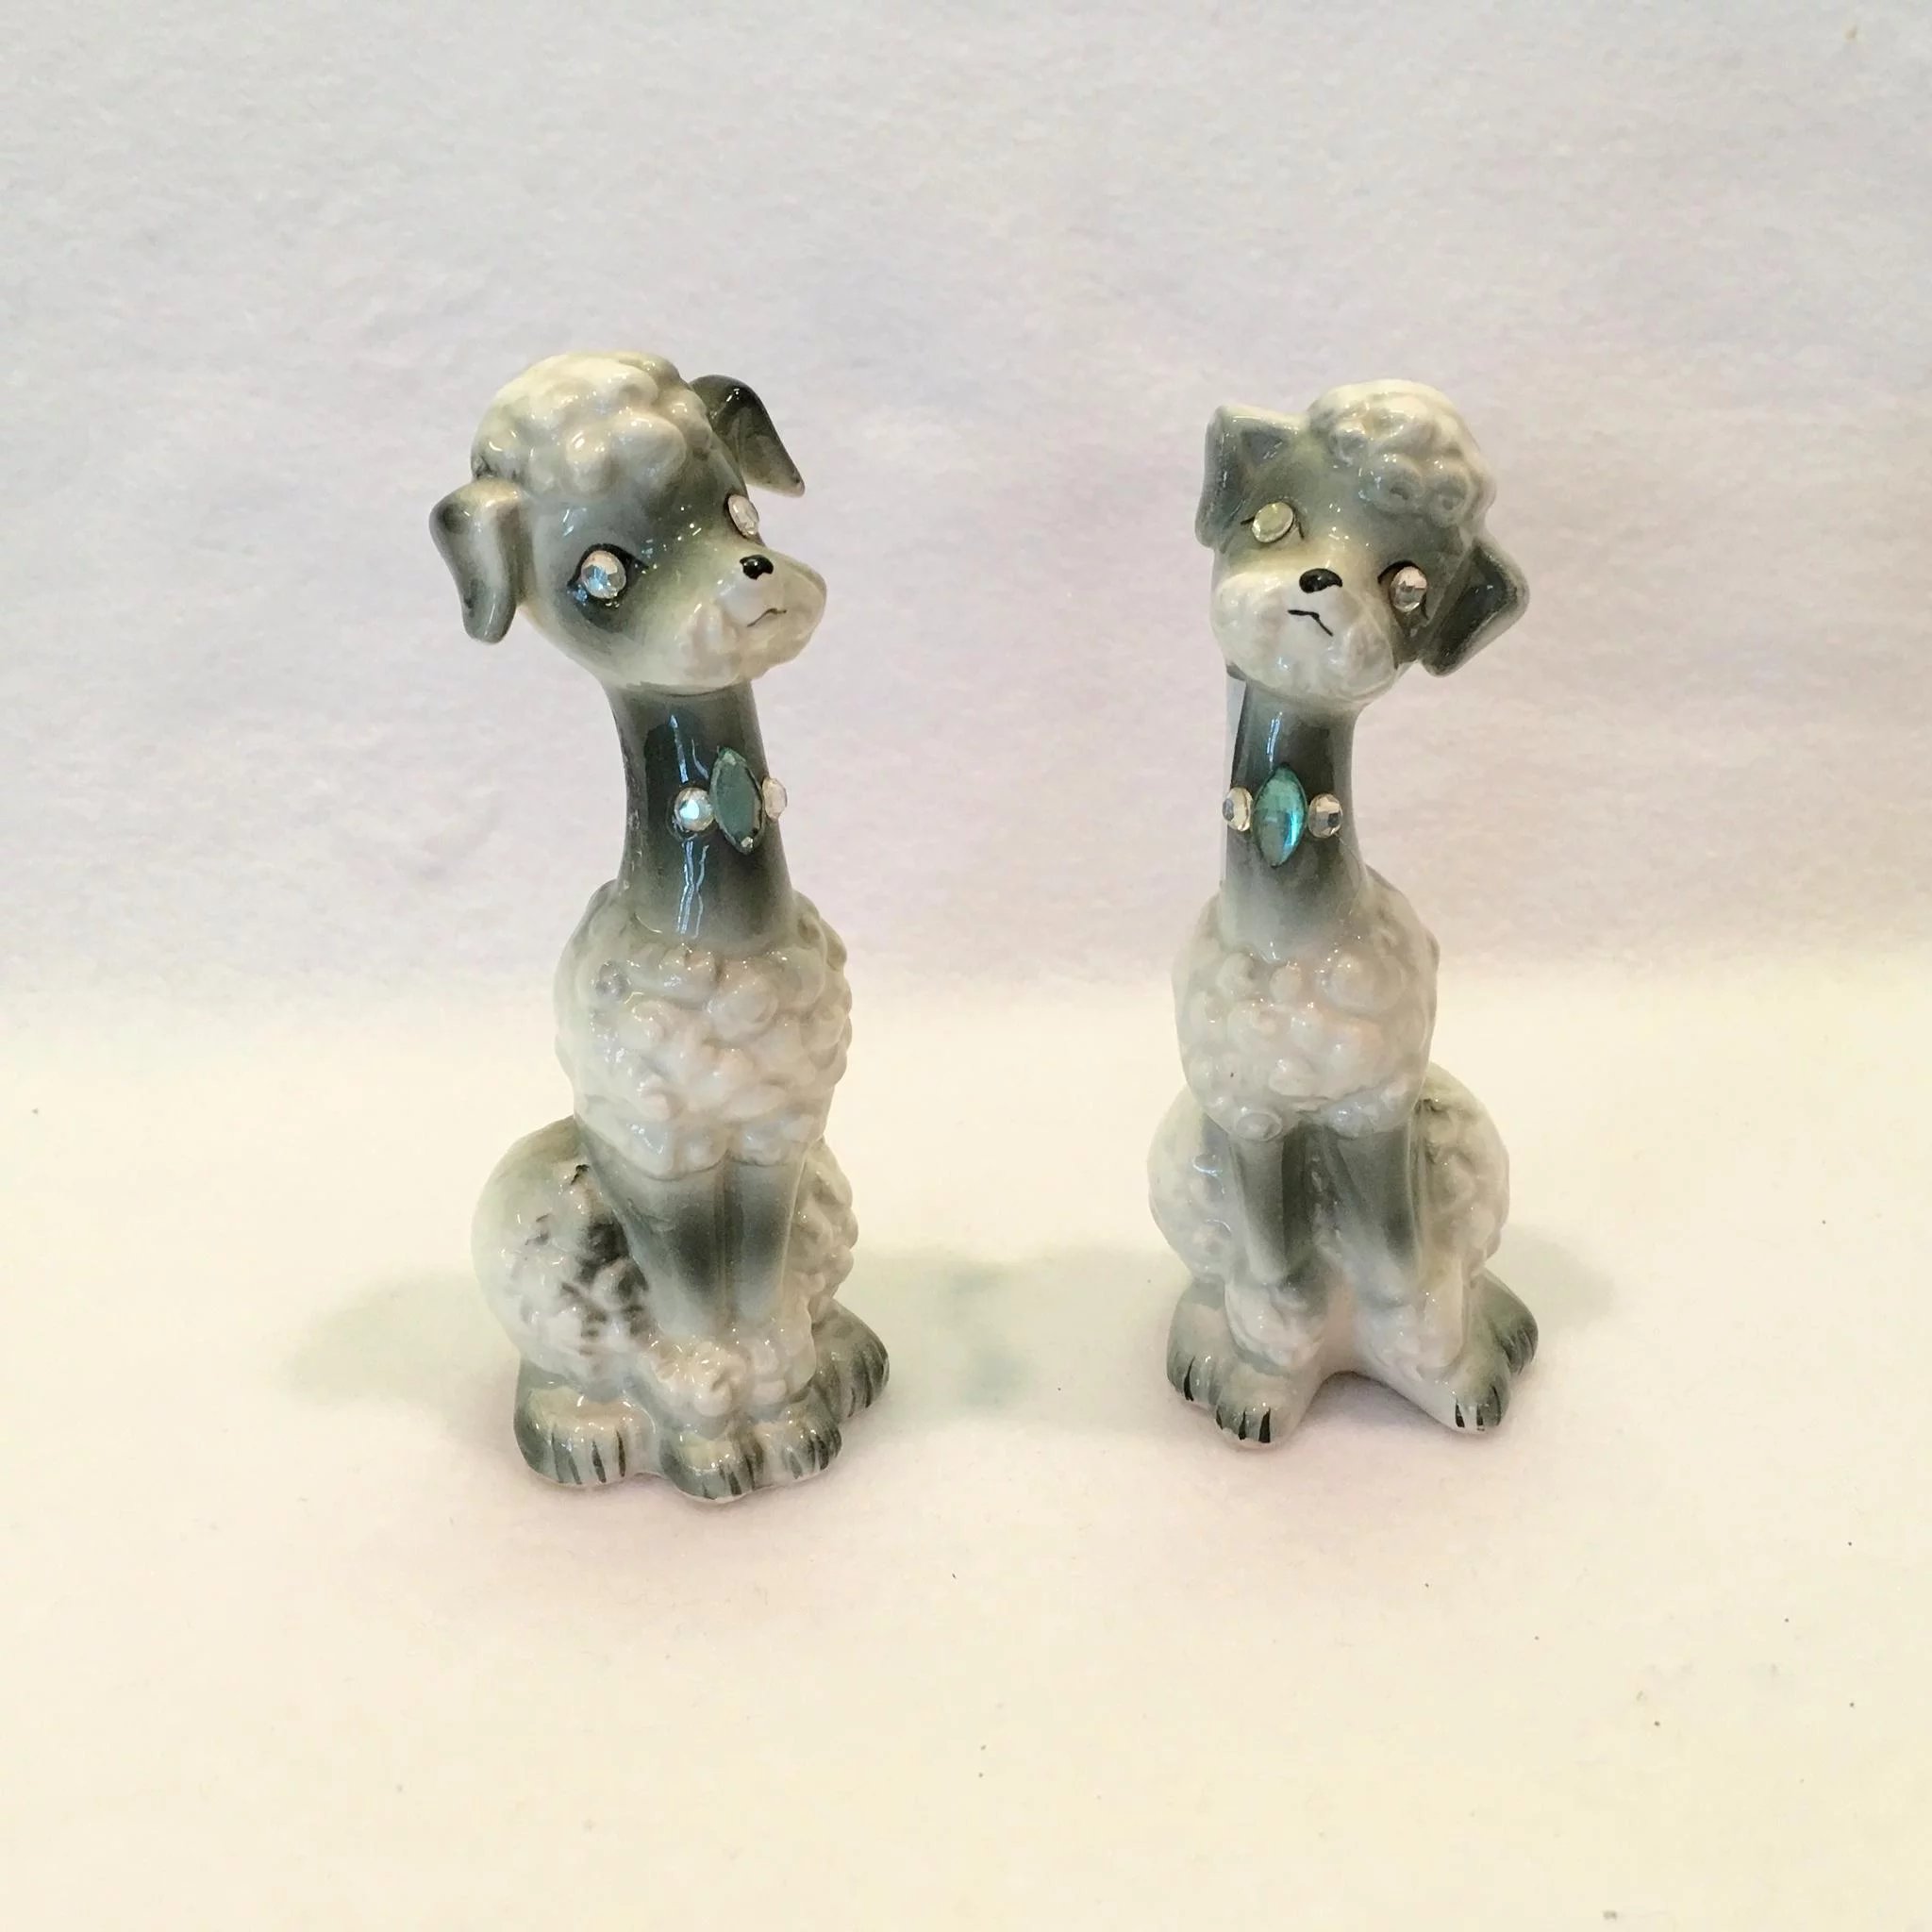 Enesco E-3344 Gray Poodle Salt and Pepper Shakers with Rhinestone ...